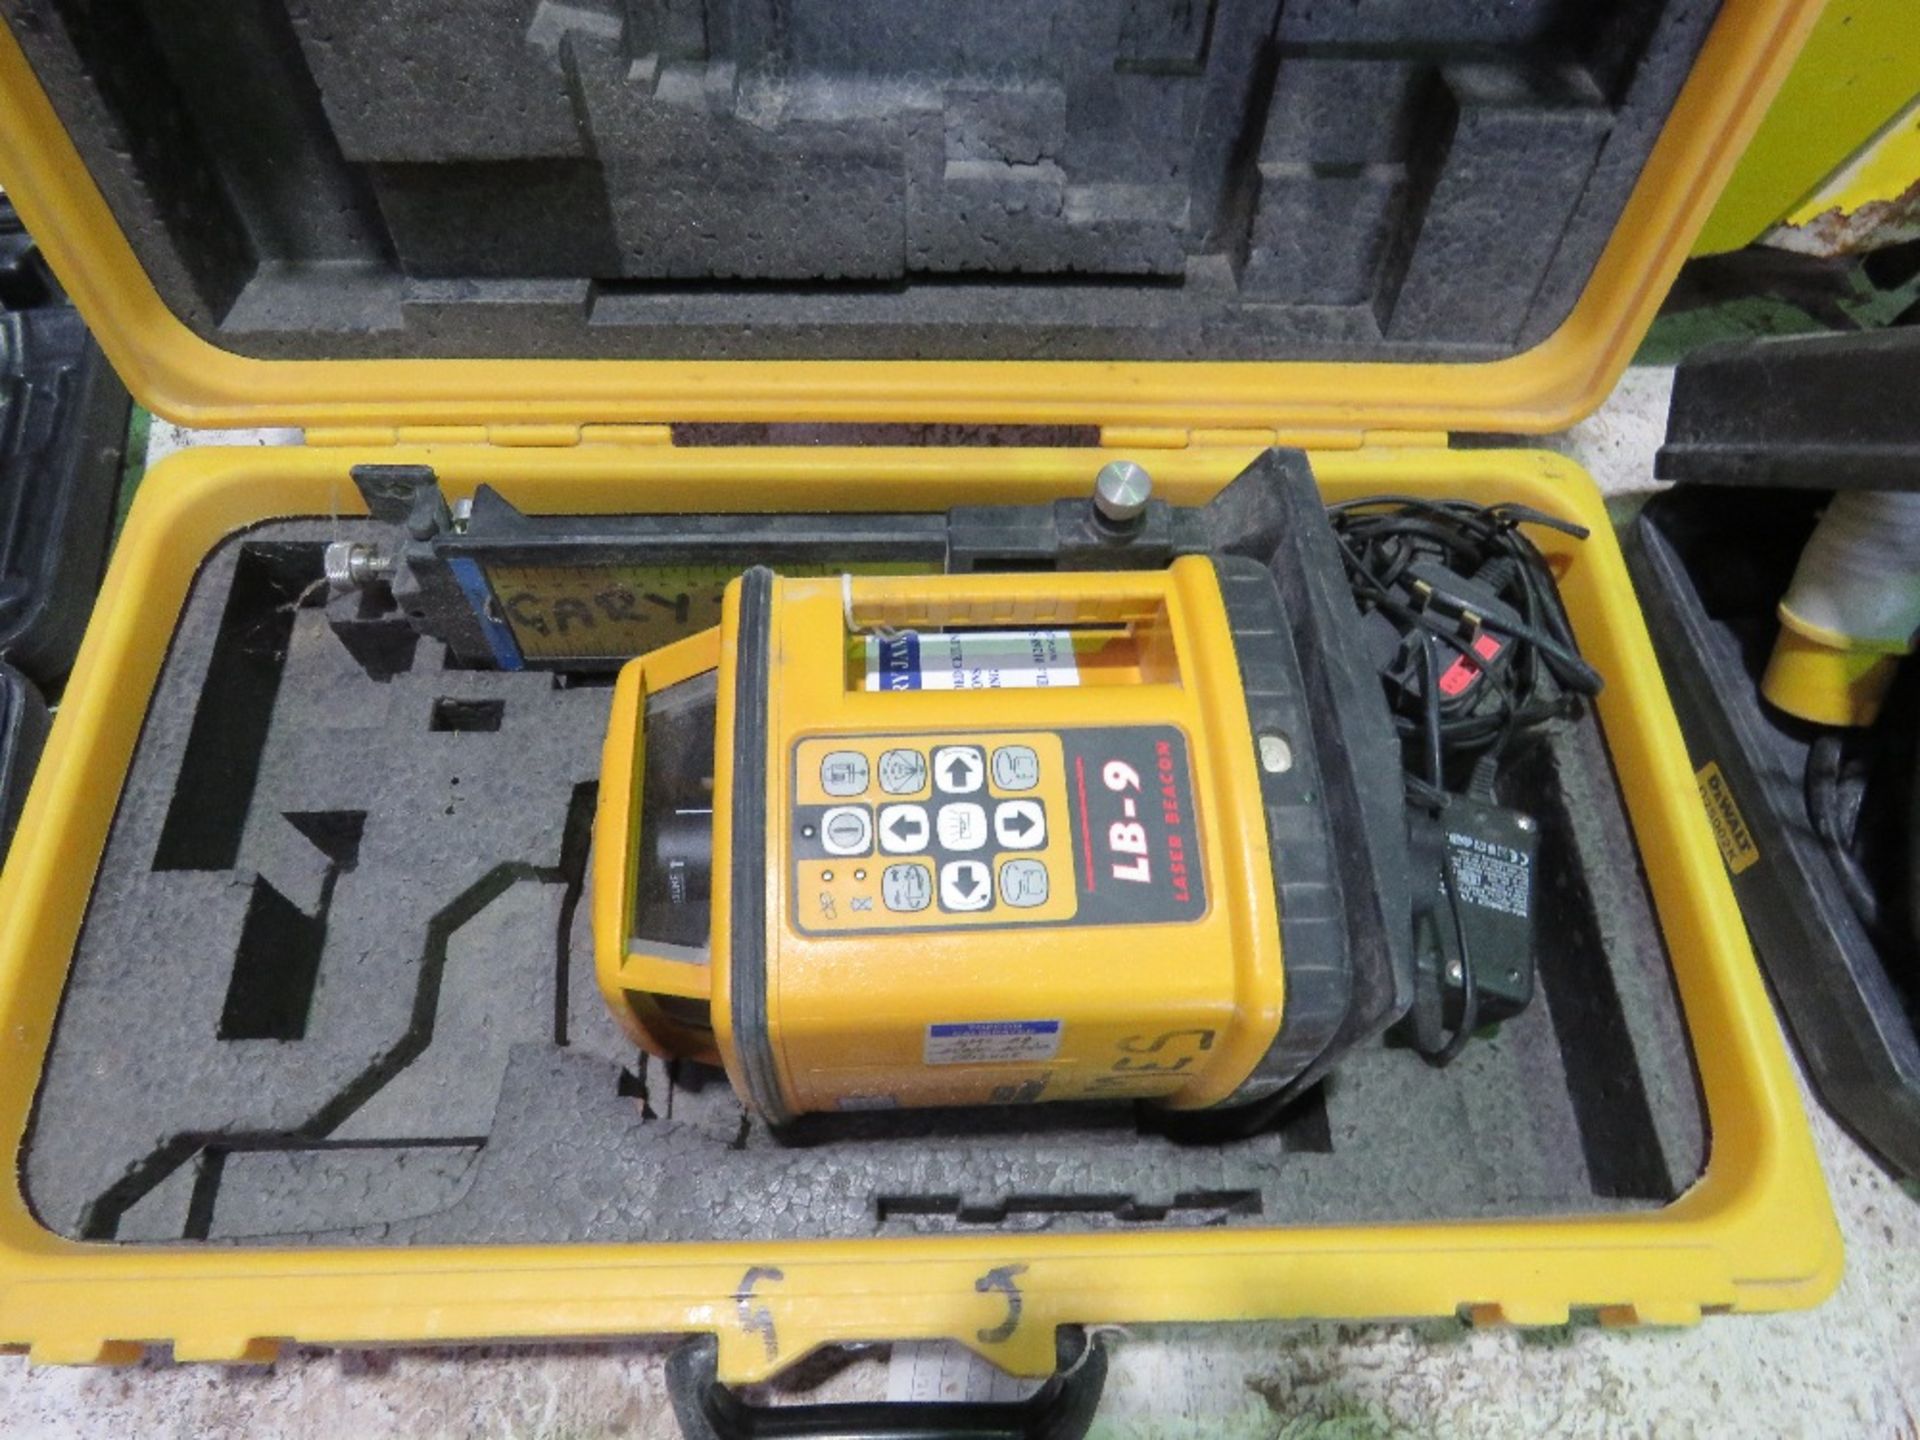 LASER ALIGNMENT LB-9 LASER LEVEL BEAM SET. DIRECT FROM LOCAL COMPANY.